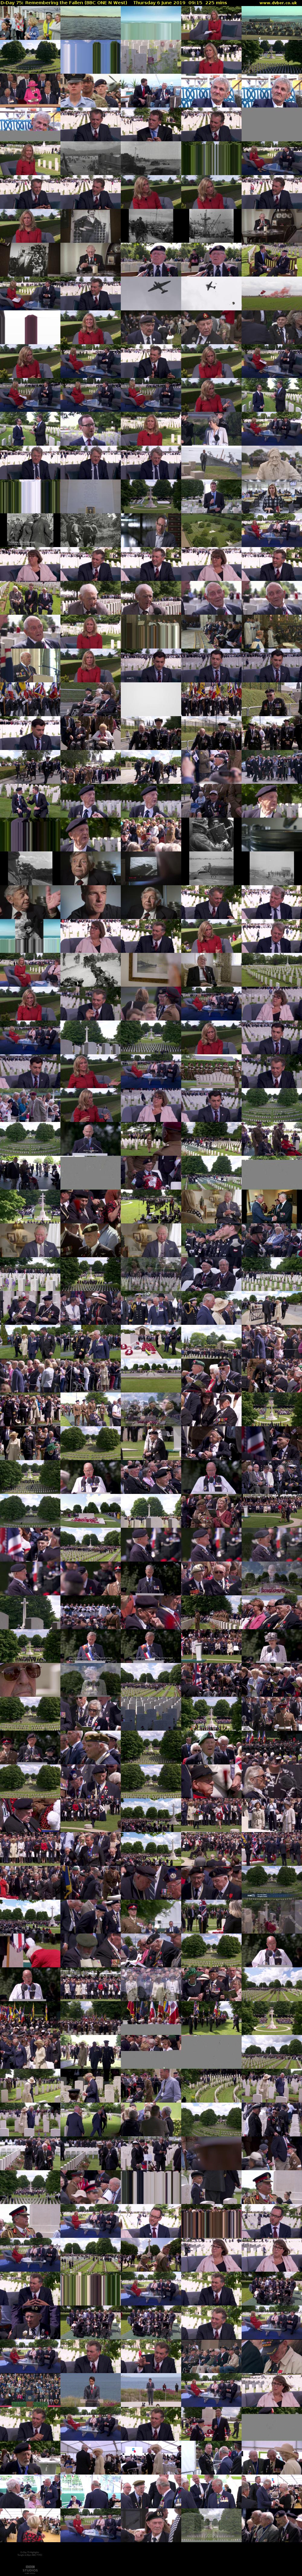 D-Day 75: Remembering the Fallen (BBC ONE N West) Thursday 6 June 2019 09:15 - 13:00